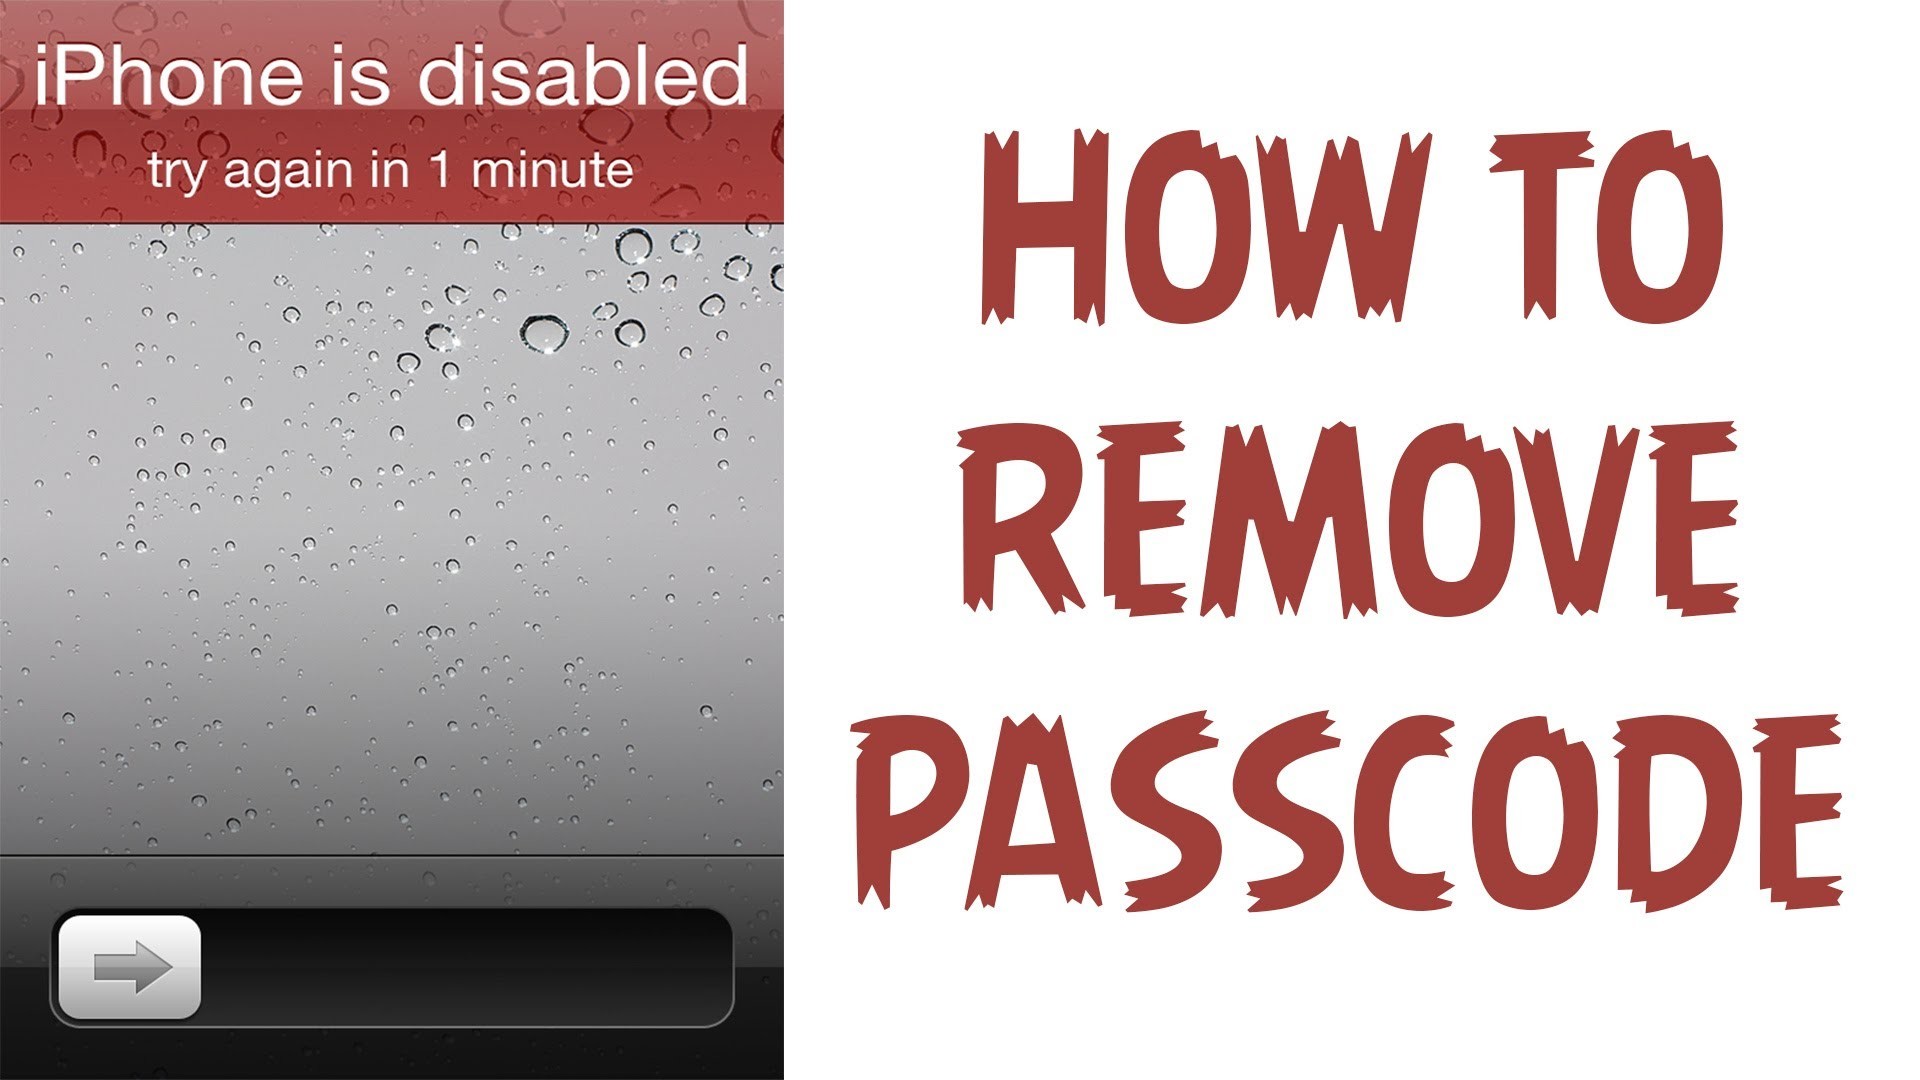 How To Remove A Passcode From an iPhone, iPad, iPod Touch